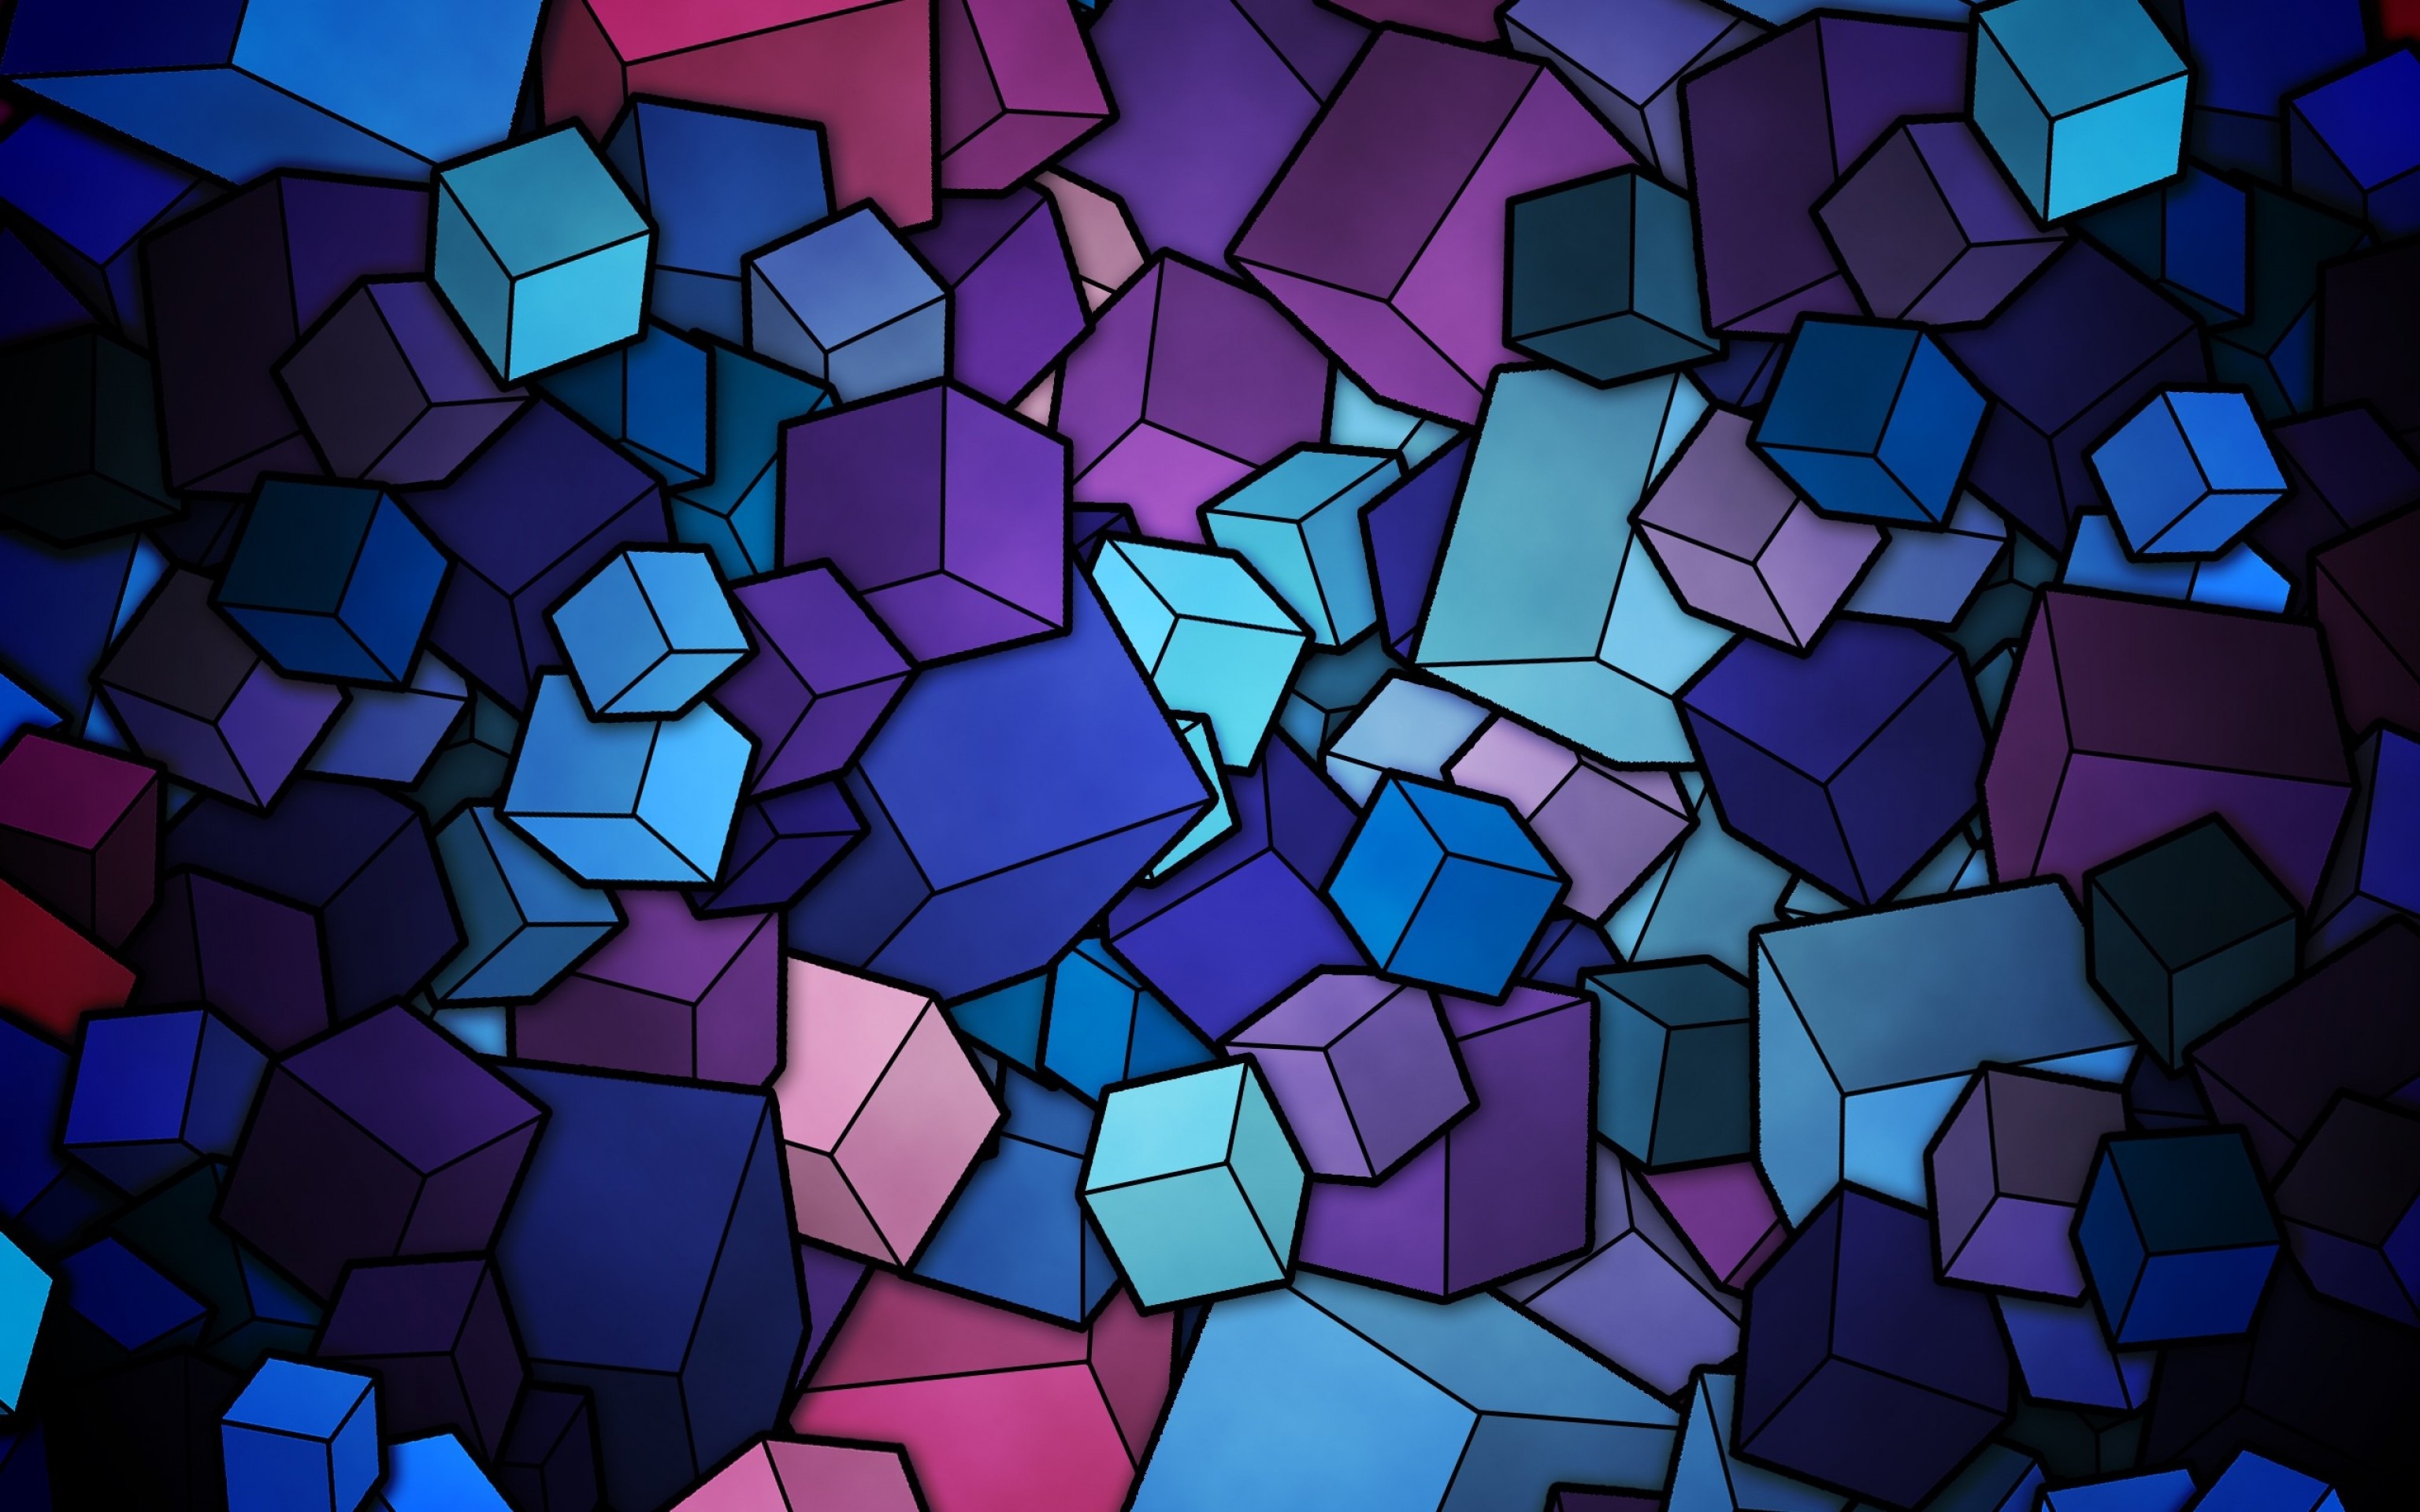 Abstract Cube Phone Wallpaper HD Image Full Light Blue Cubes